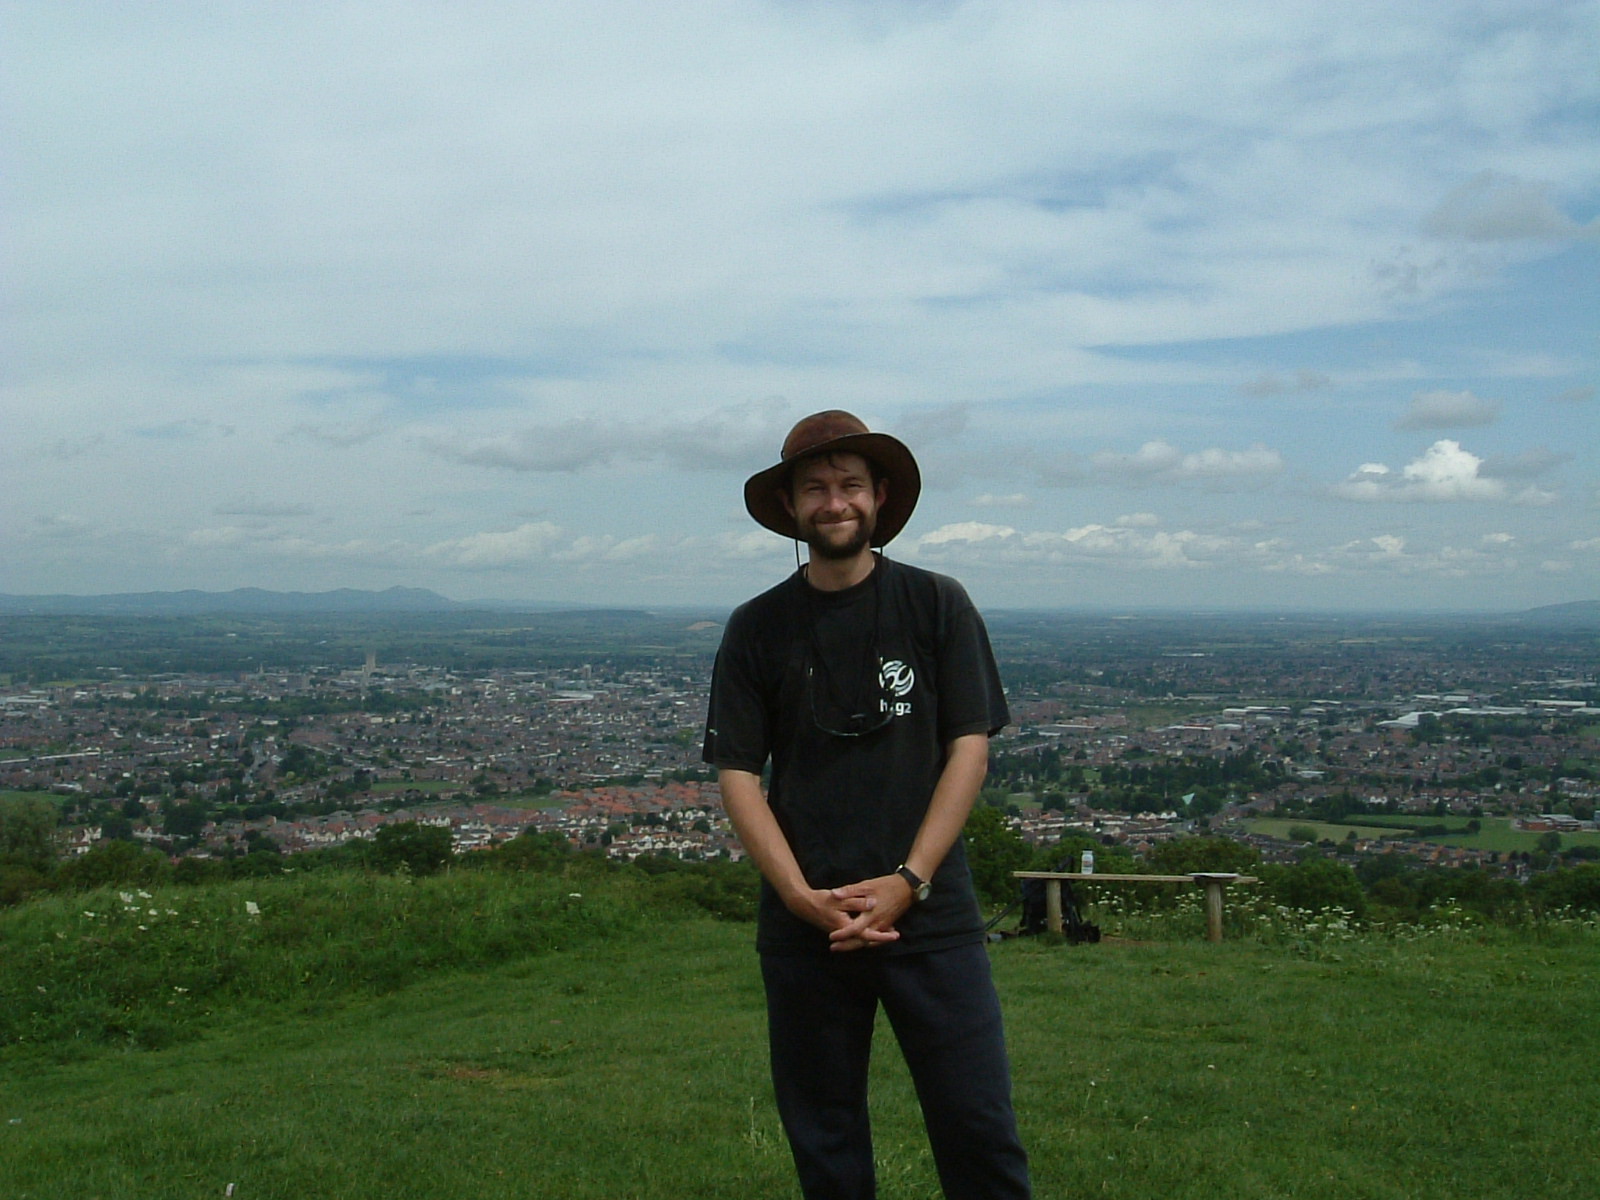 Mark on top of Robinswood Hill with Gloucester laid out in the background